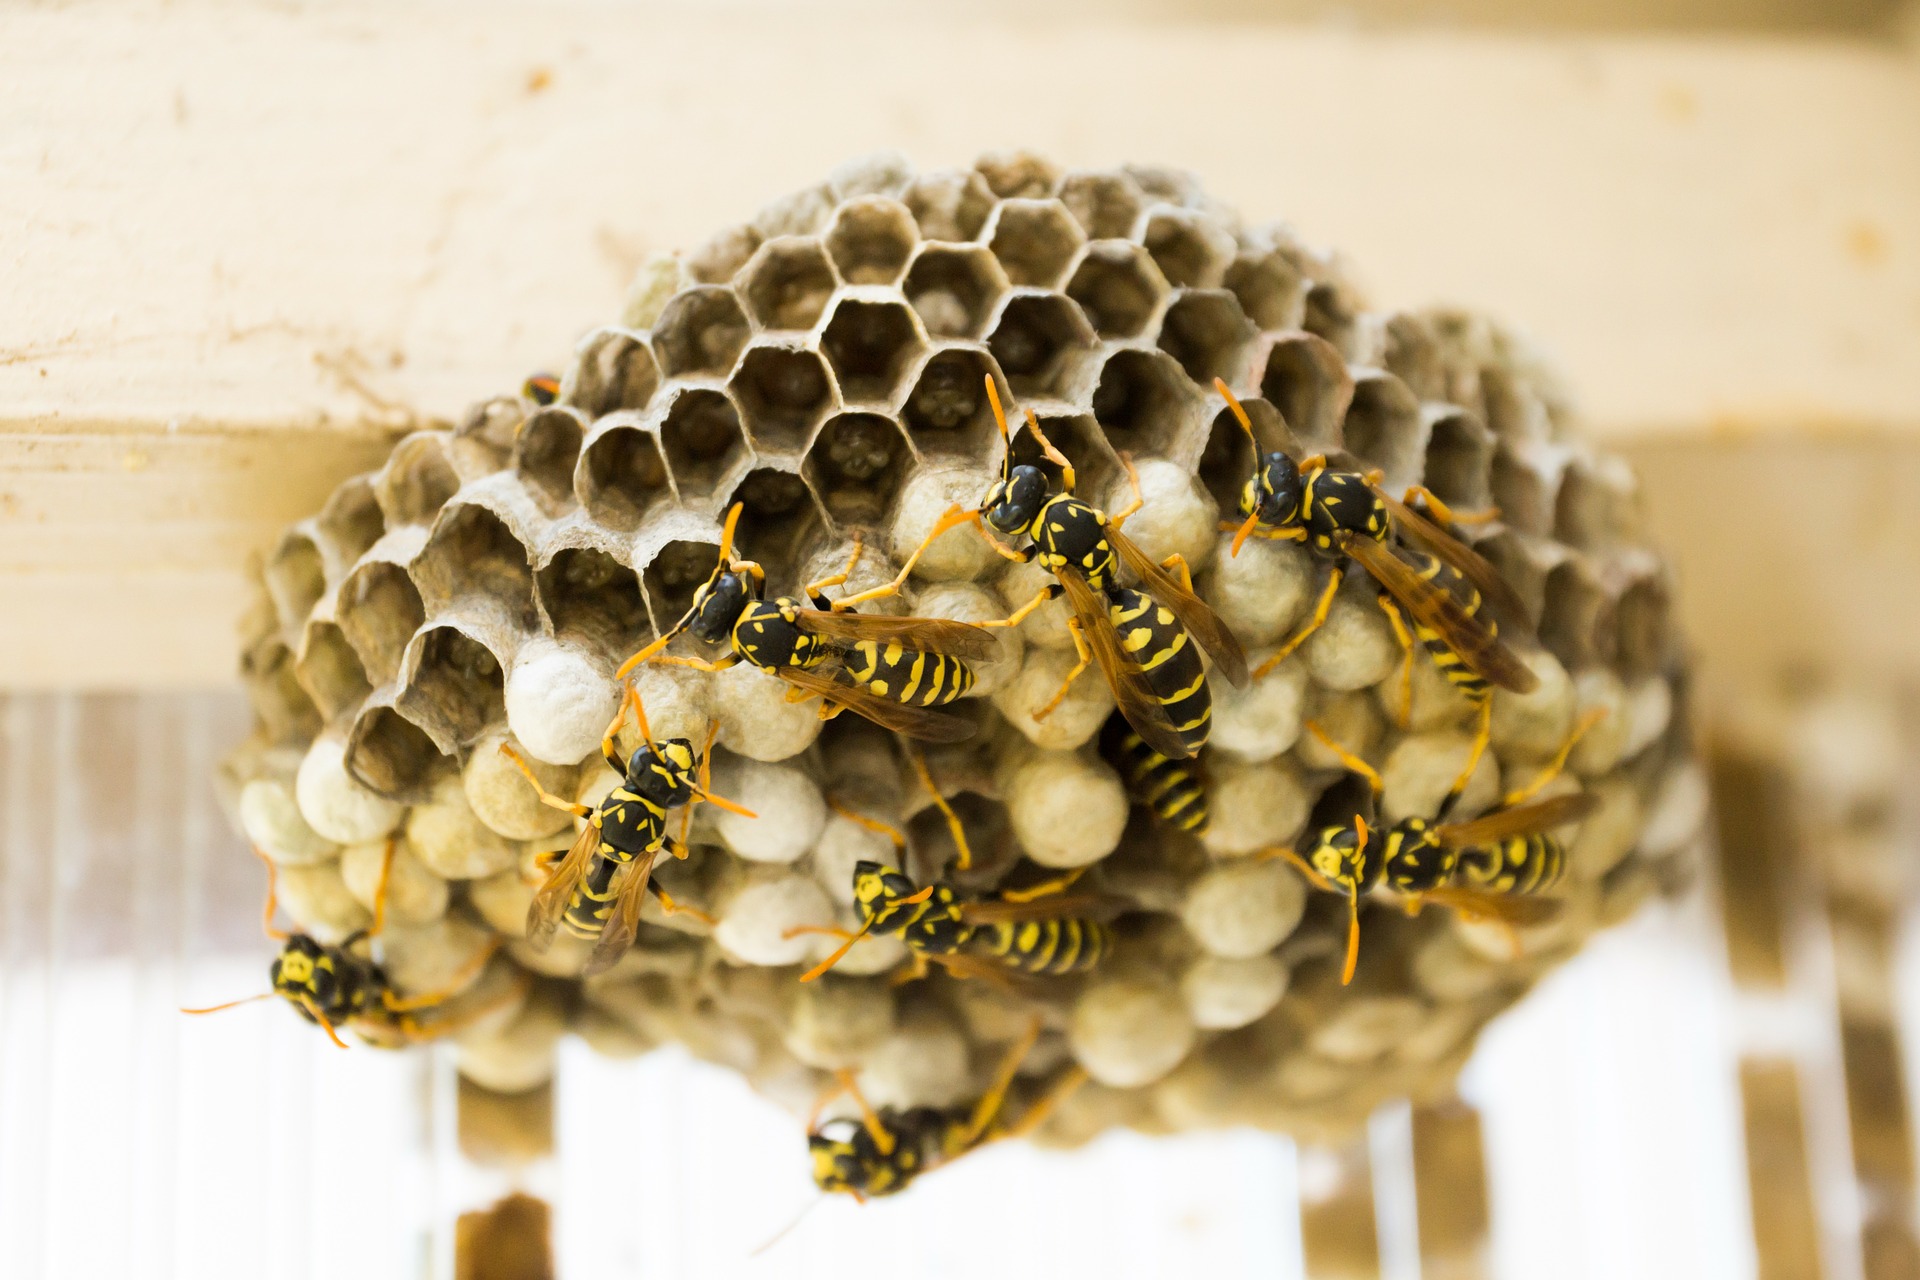 Wasp Nest Removal | Wasp Control